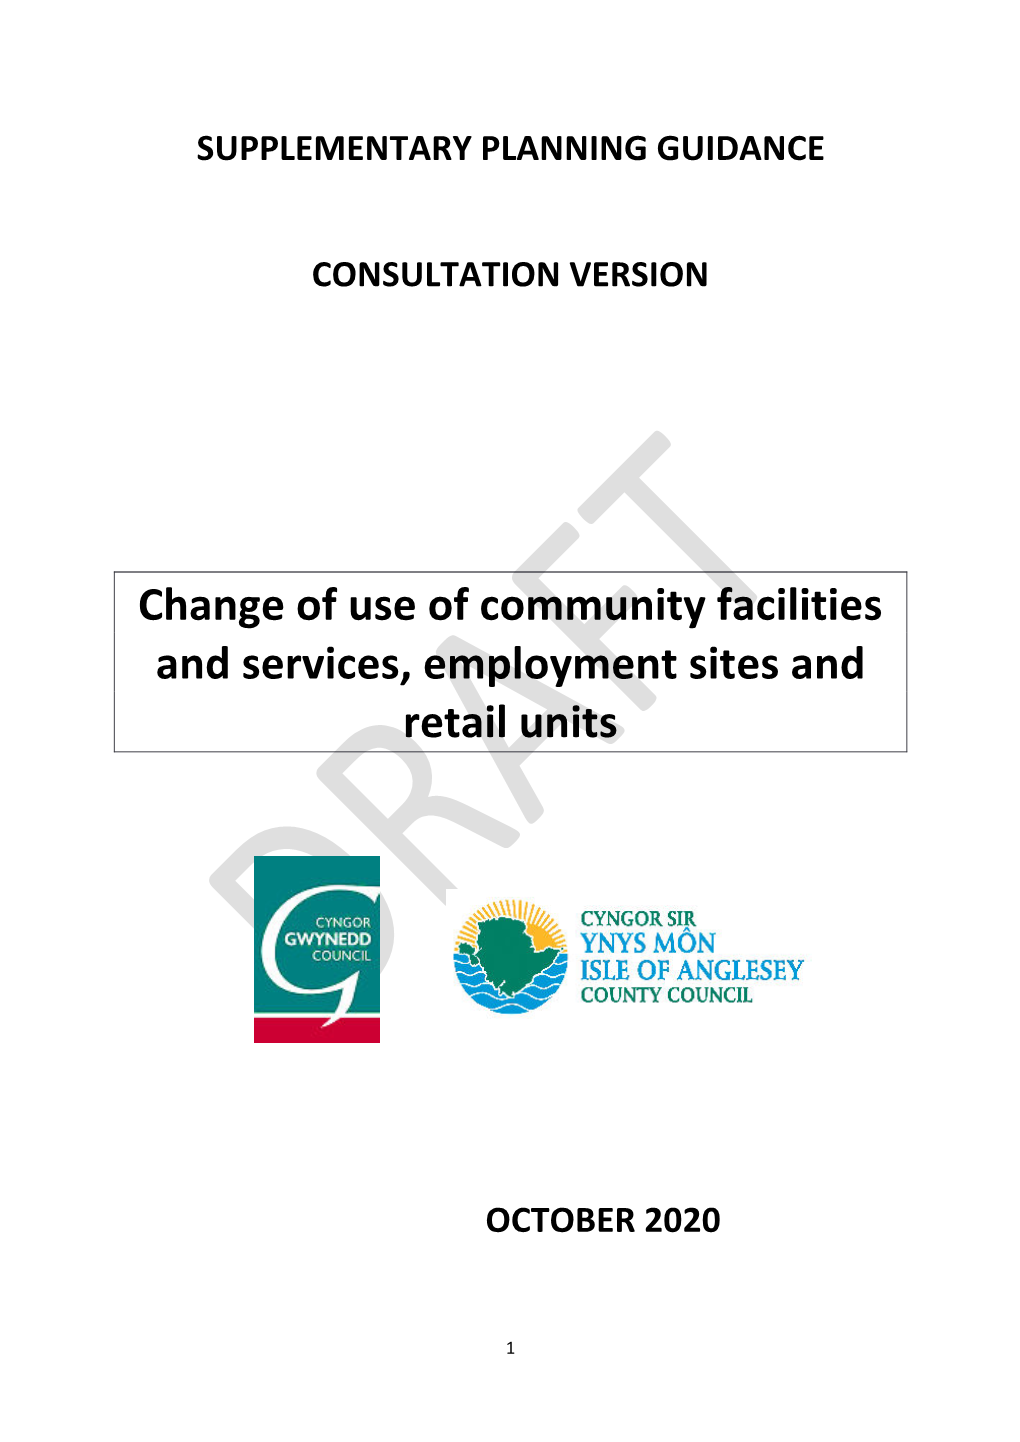 Change of Use of Community Facilities and Services, Employment Sites and Retail Units